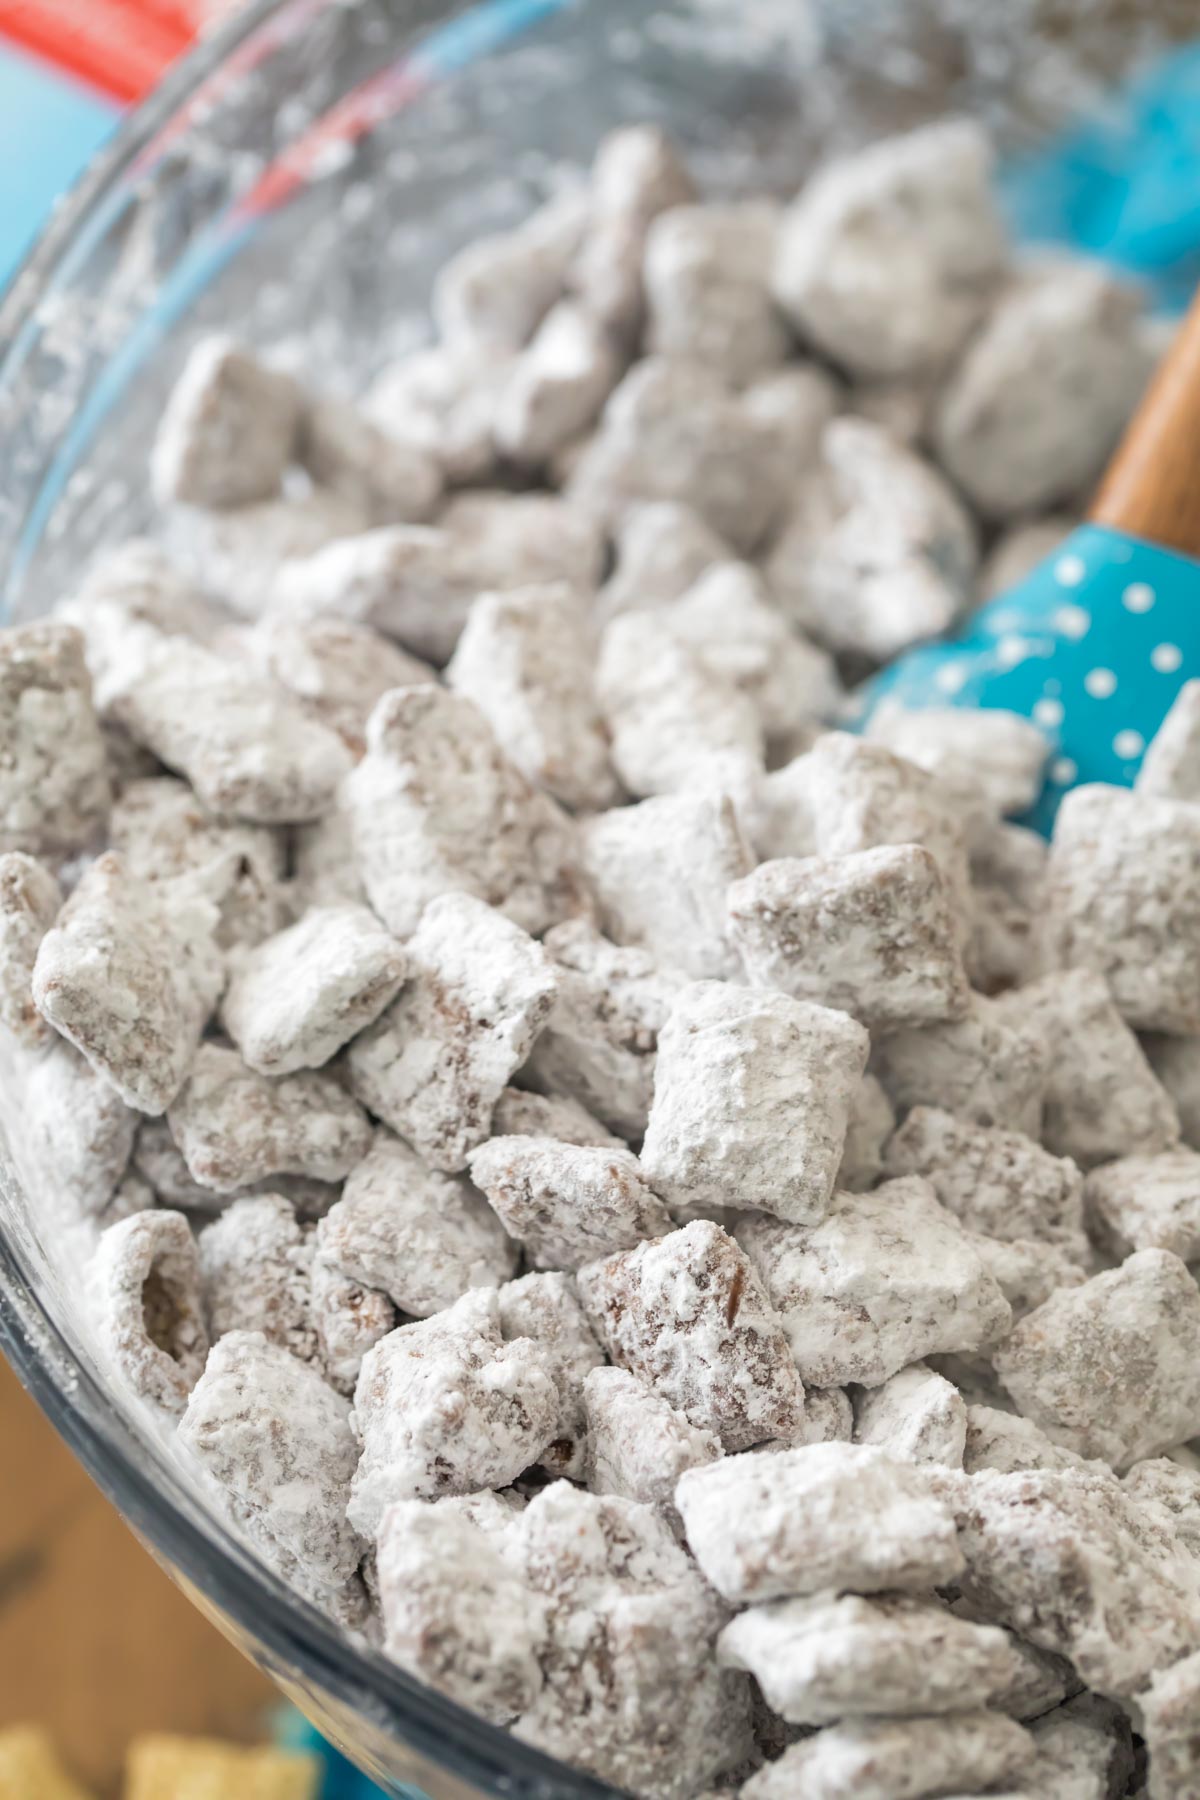 stirring powdered sugar over chocolate coated cereal